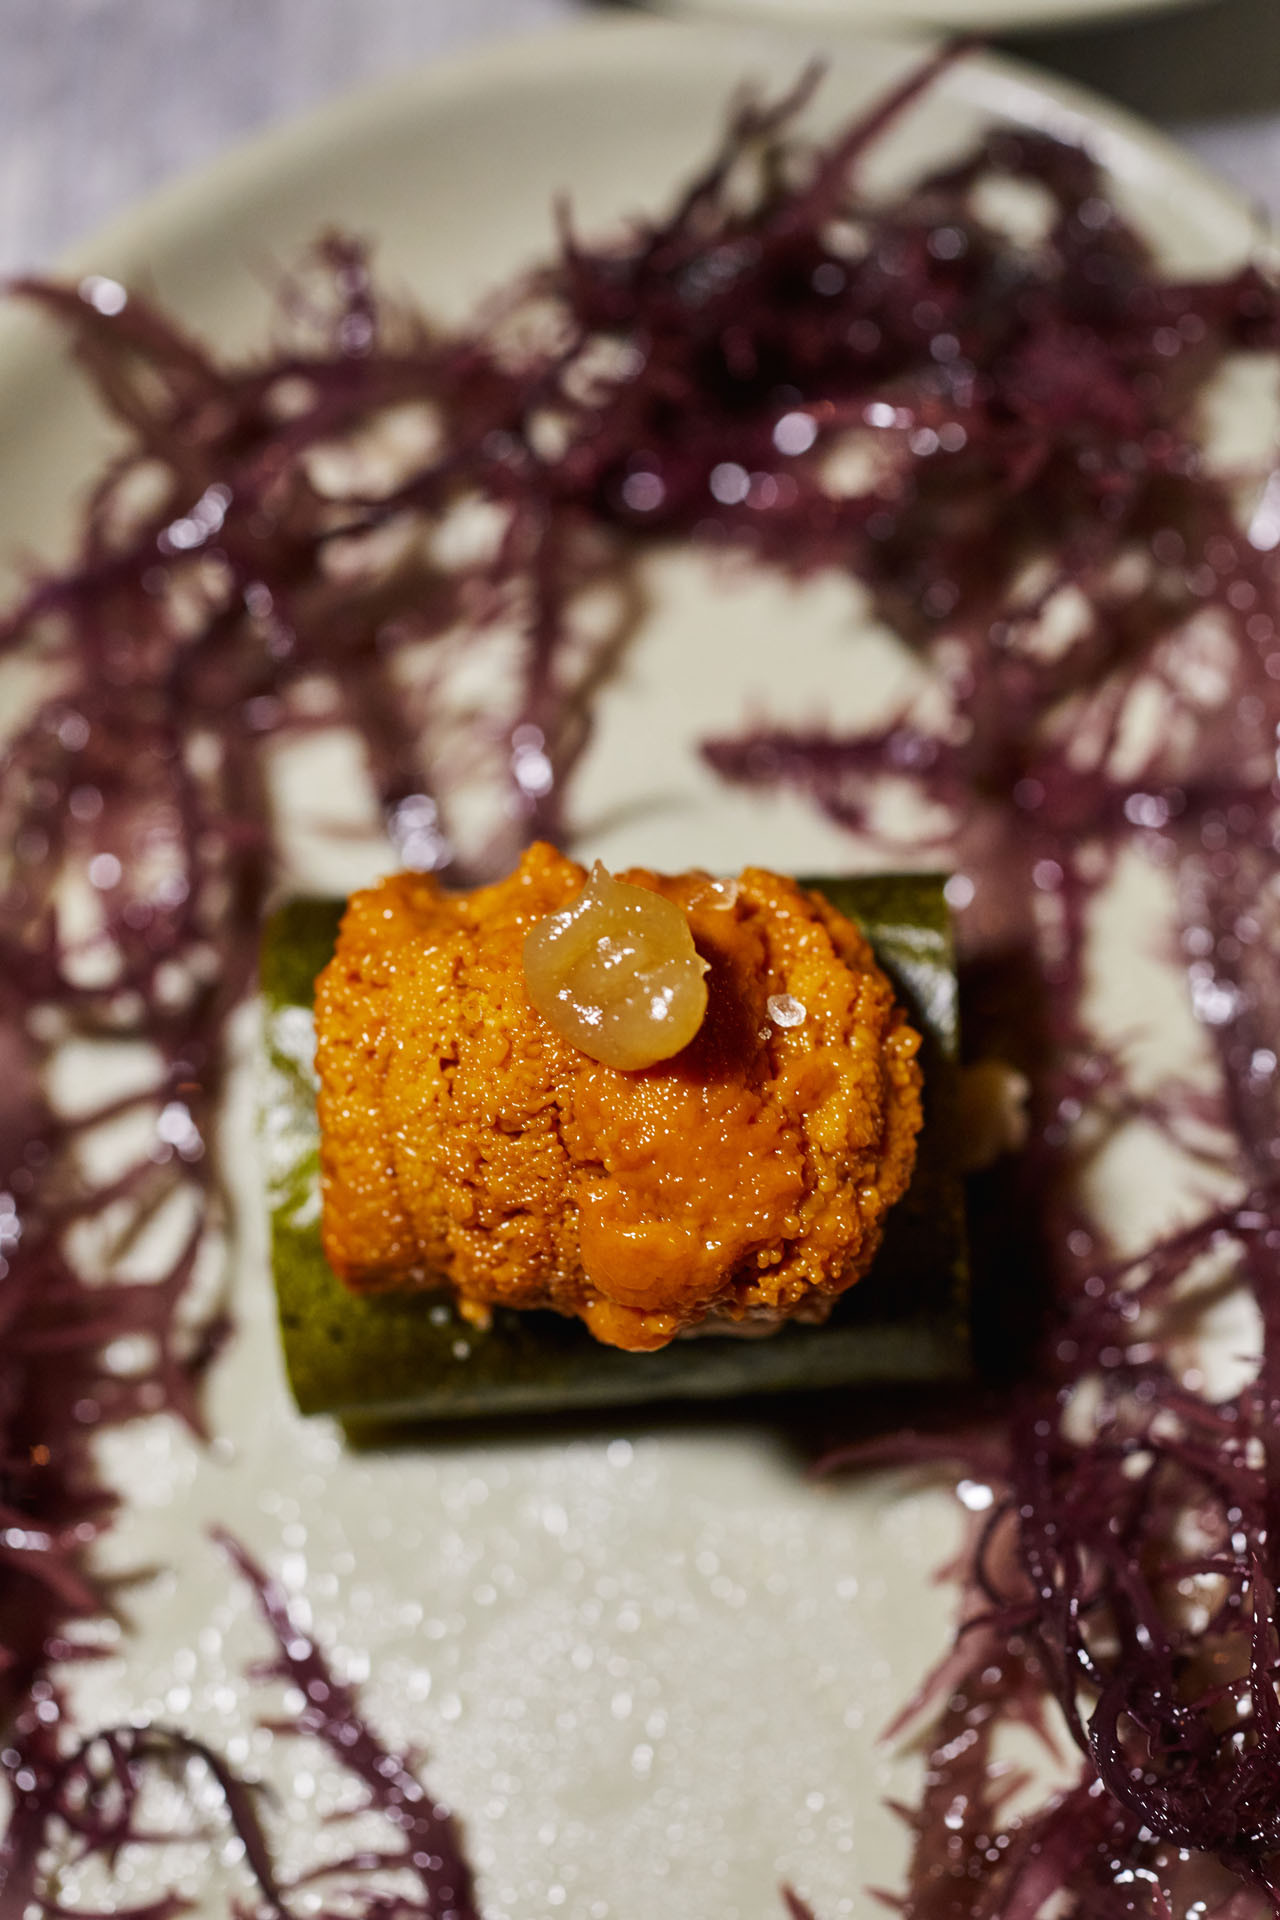 Dinner at the Beard House, Gaggan Anand